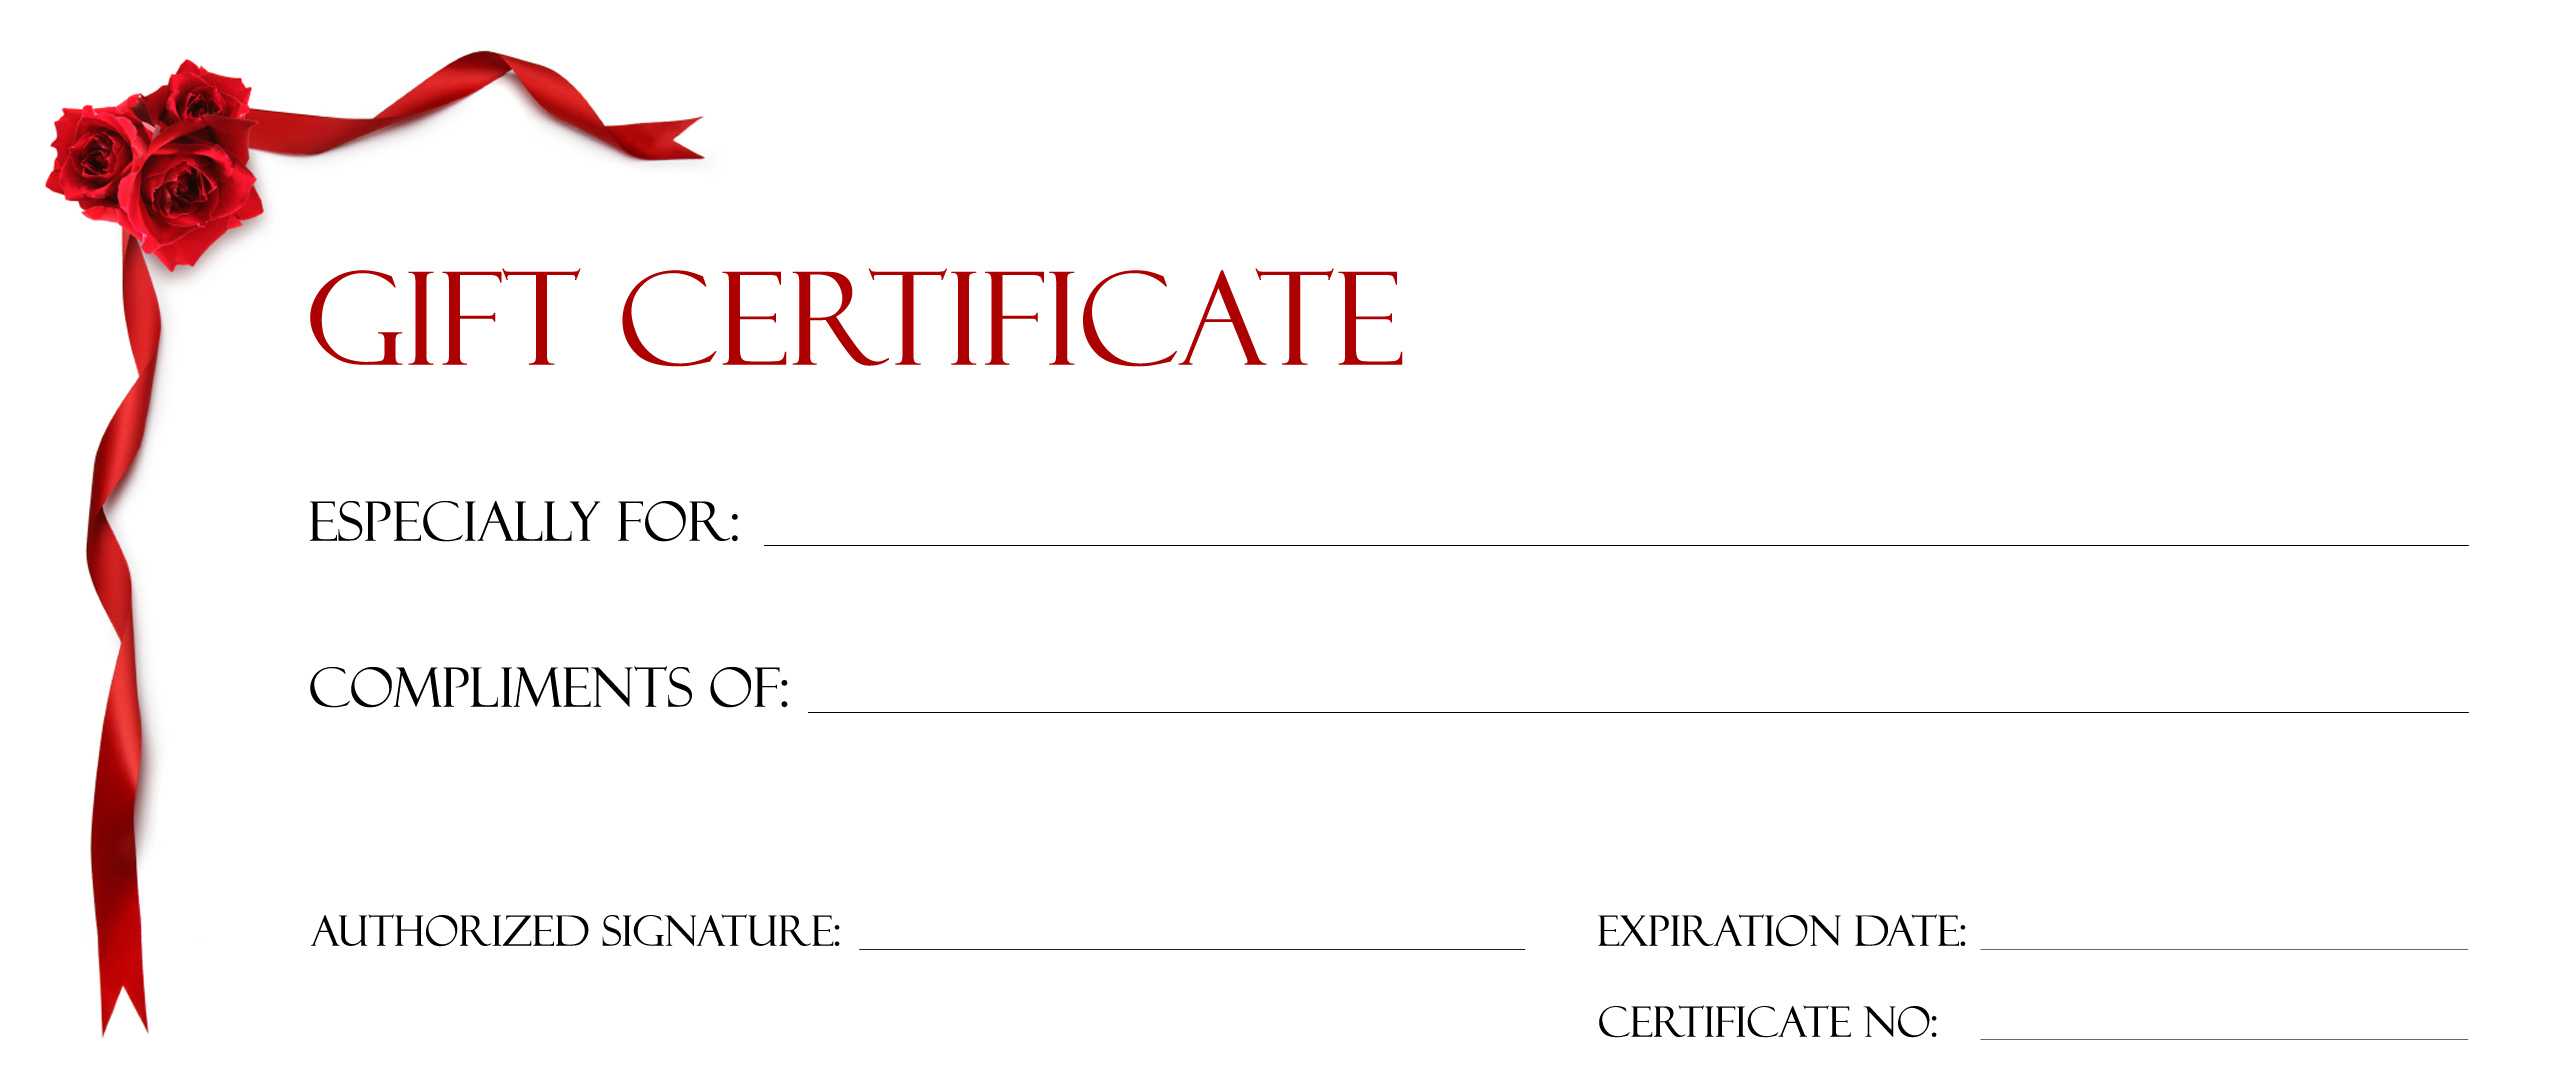 Gift Certificate Template Microsoft Publisher Intended For Gift Certificate Template Publisher